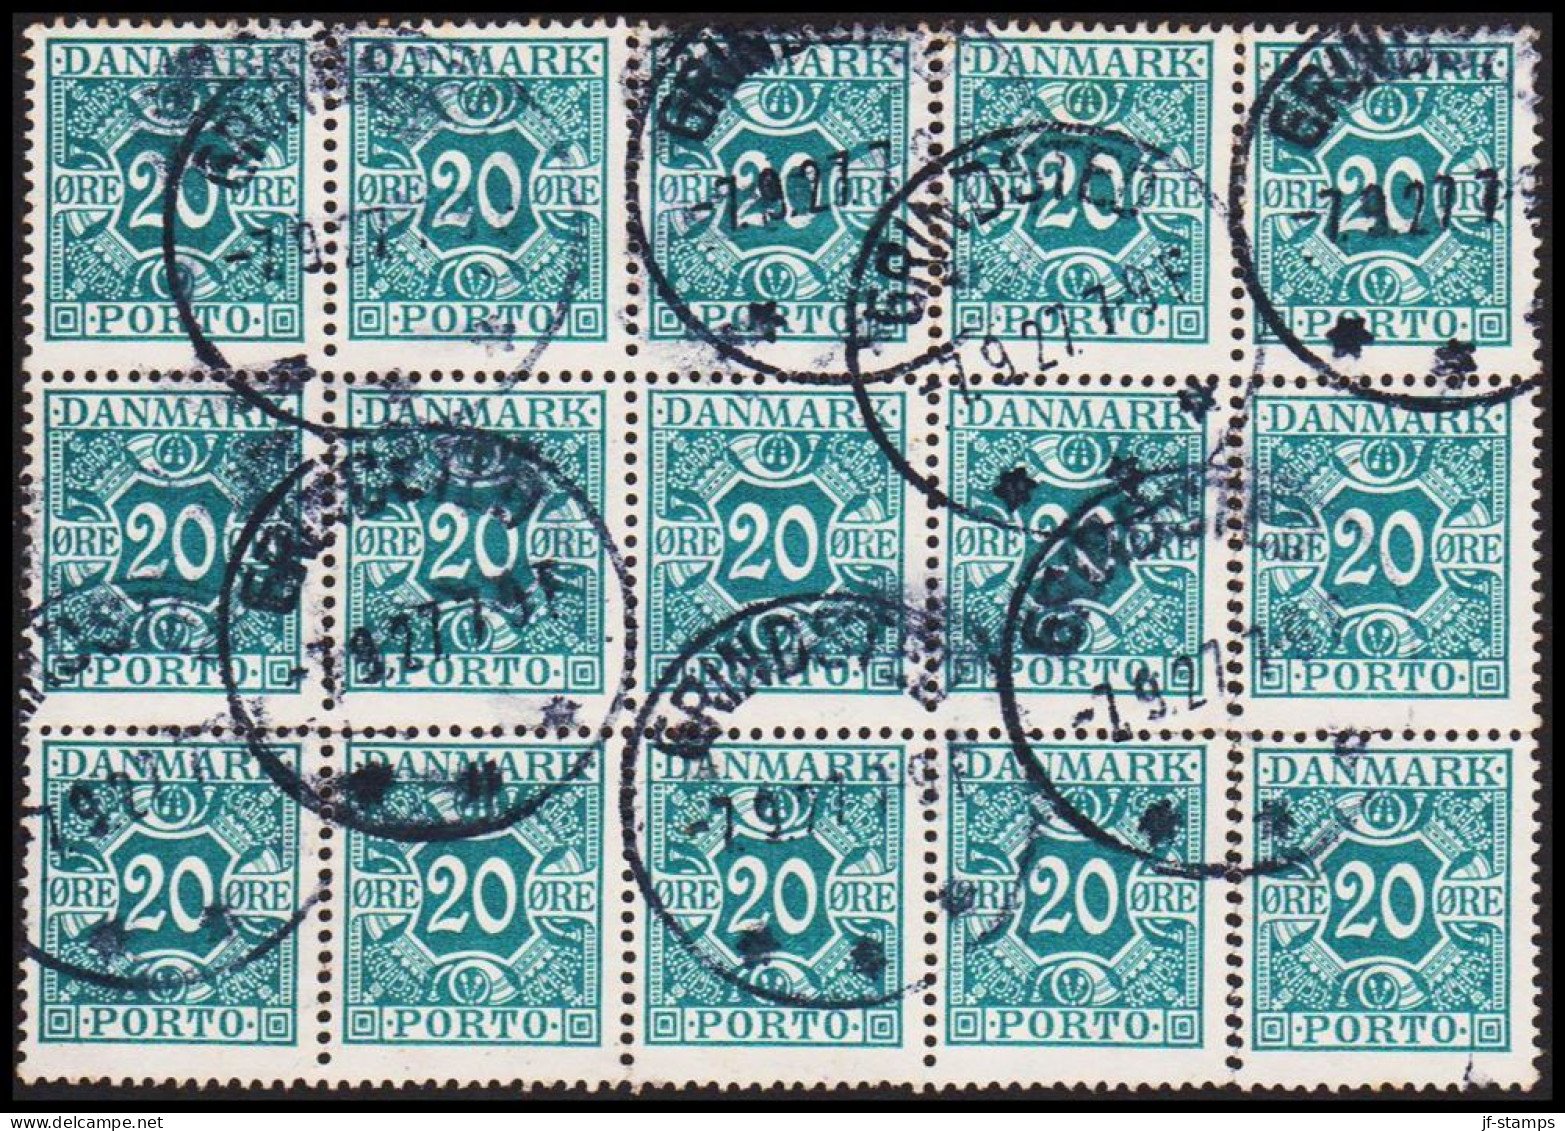 1924. DANMARK. Postage Due. Porto. 20 Øre Blue In 15block Cancelled GRINDSTED 7.9.27. Unusual... (Michel P14) - JF545143 - Port Dû (Taxe)